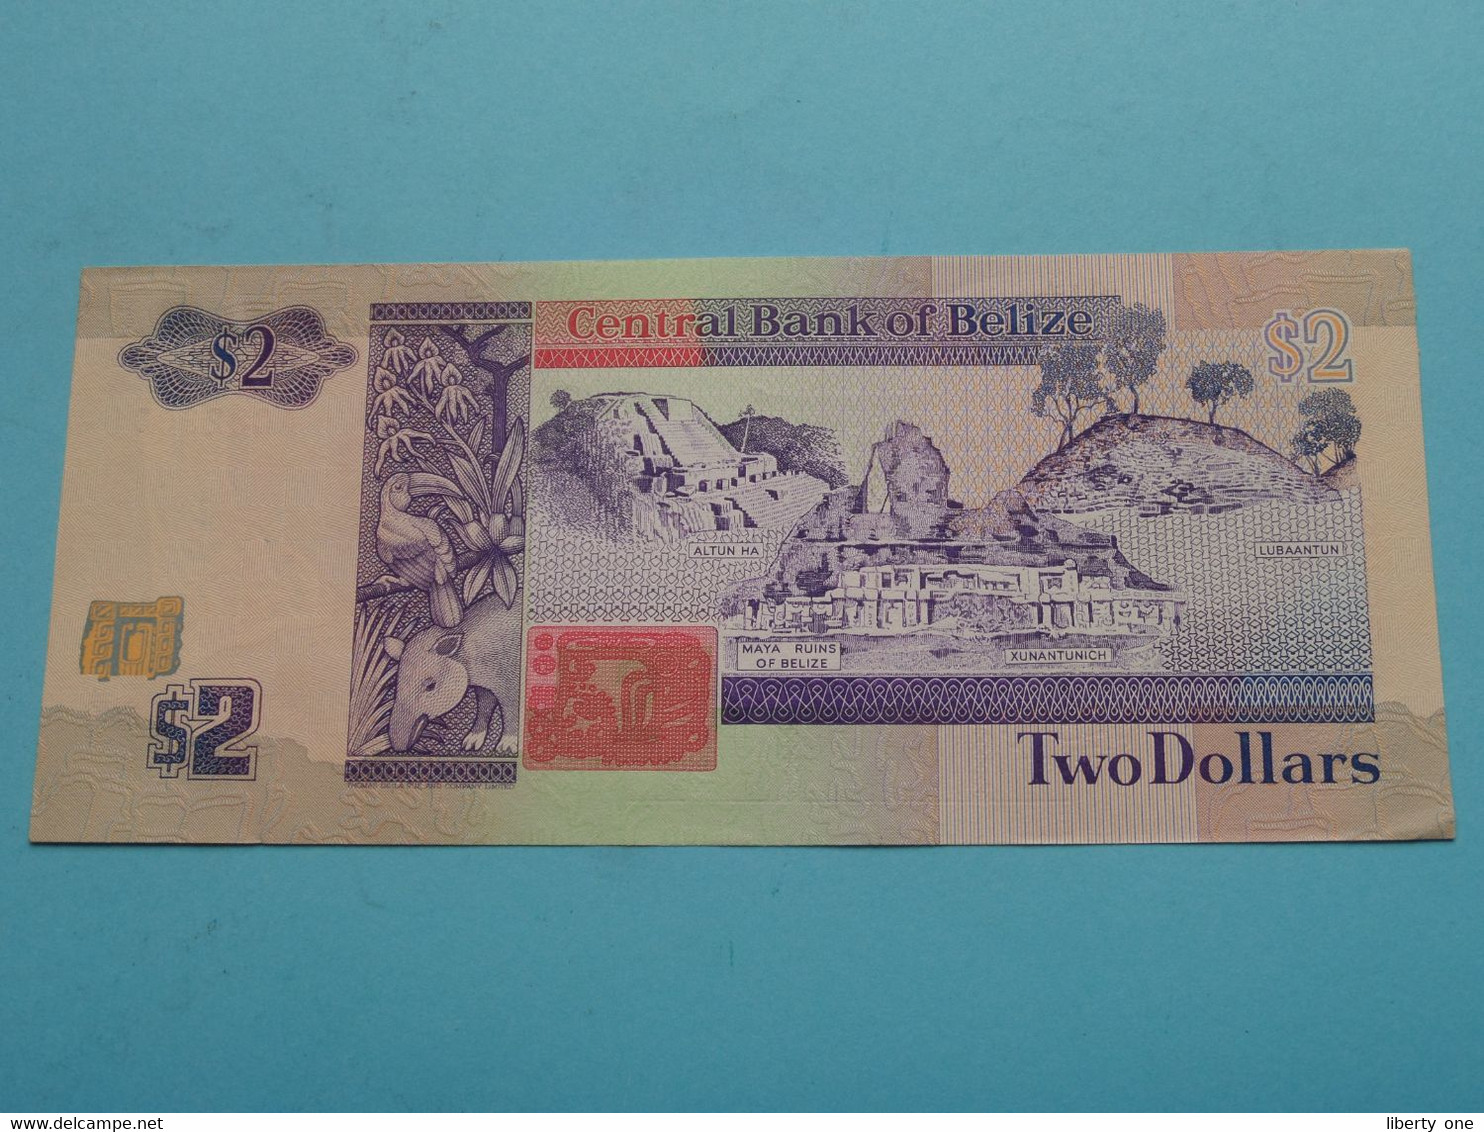 2 Two Dollars  - 1 June 1991 ( AC823001 ) Central Bank Of BELIZE ( For Grade, Please See Photo ) UNC ! - Belice